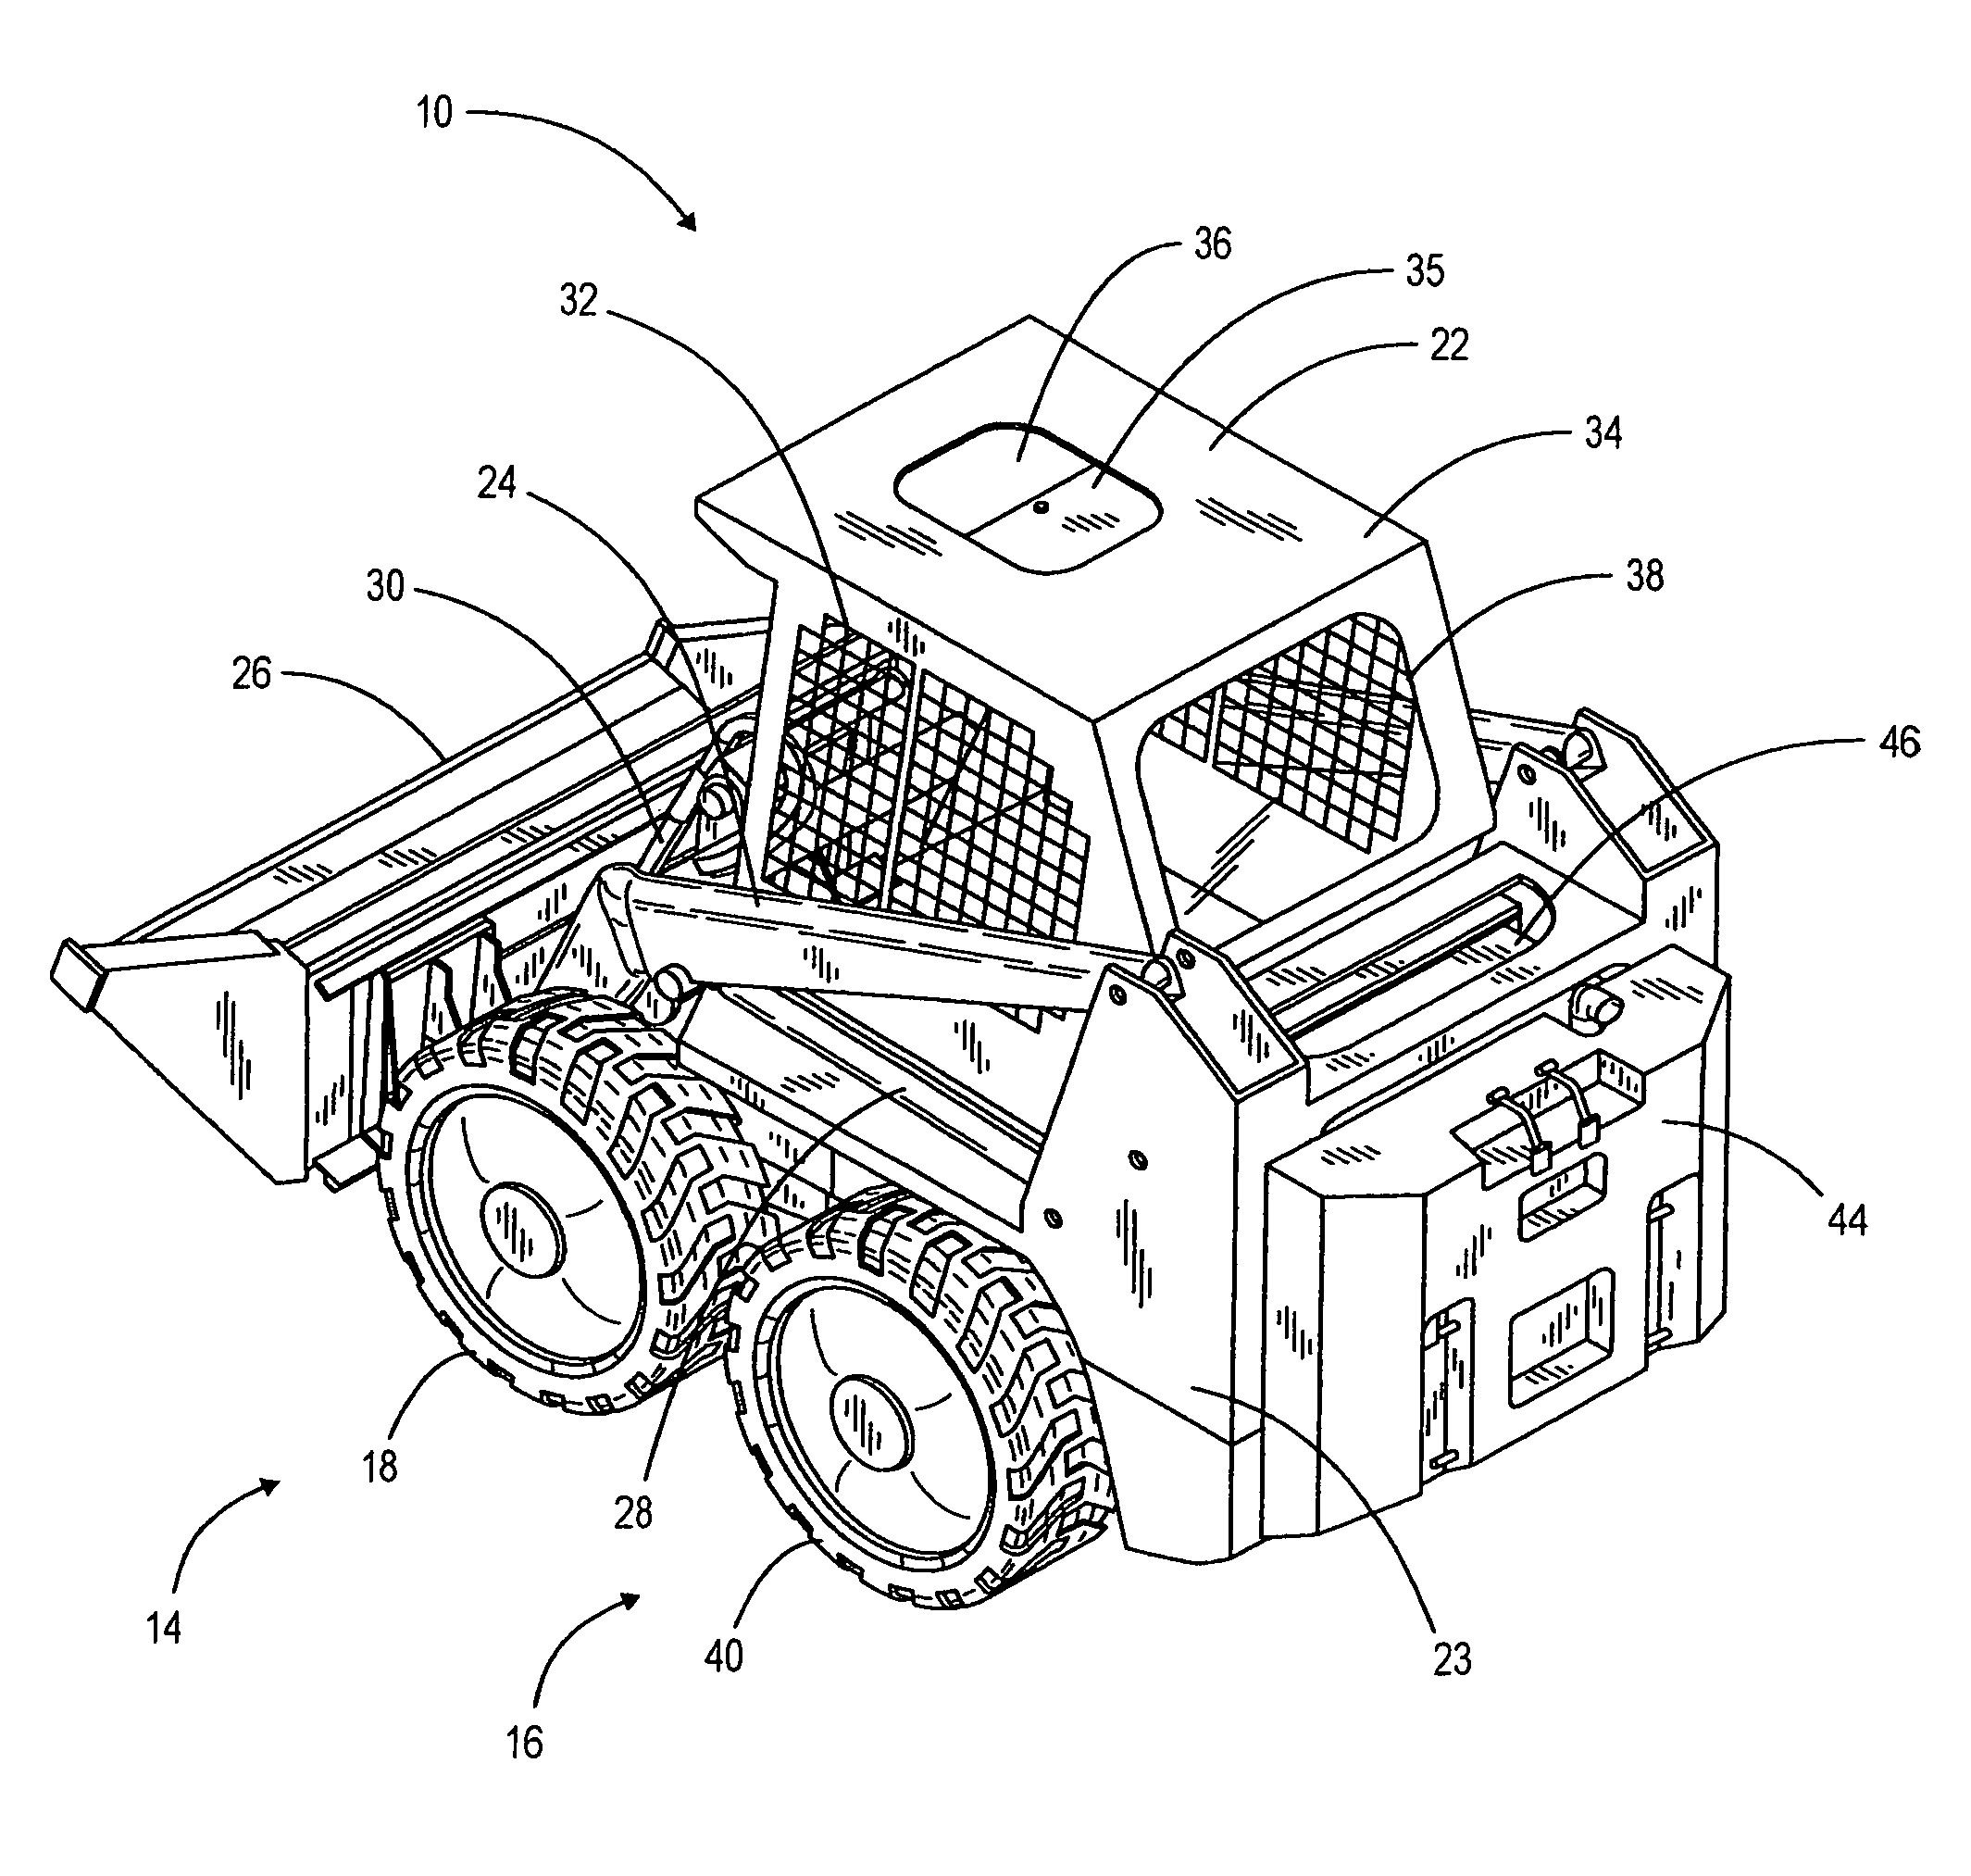 Extendable frame work vehicle having lift member movable in a true vertical fashion